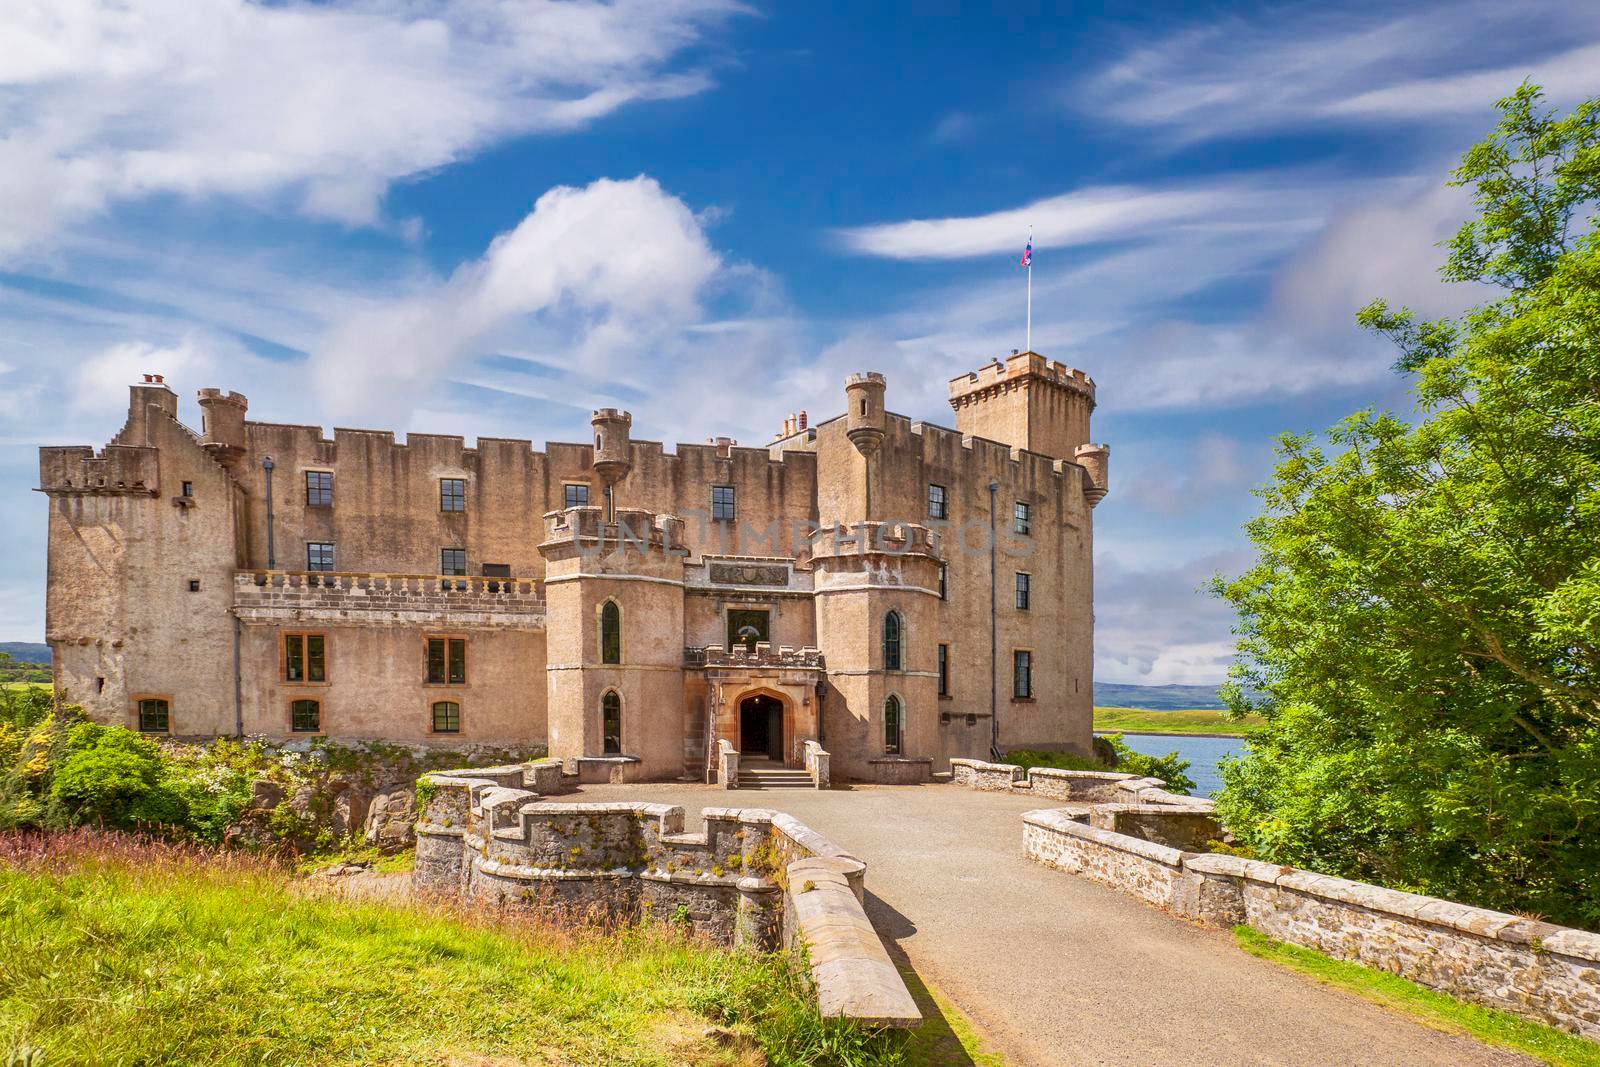 Dunvegan castle on the Isle of Skye - the seat of the MacLeod of MacLeod, Scotland